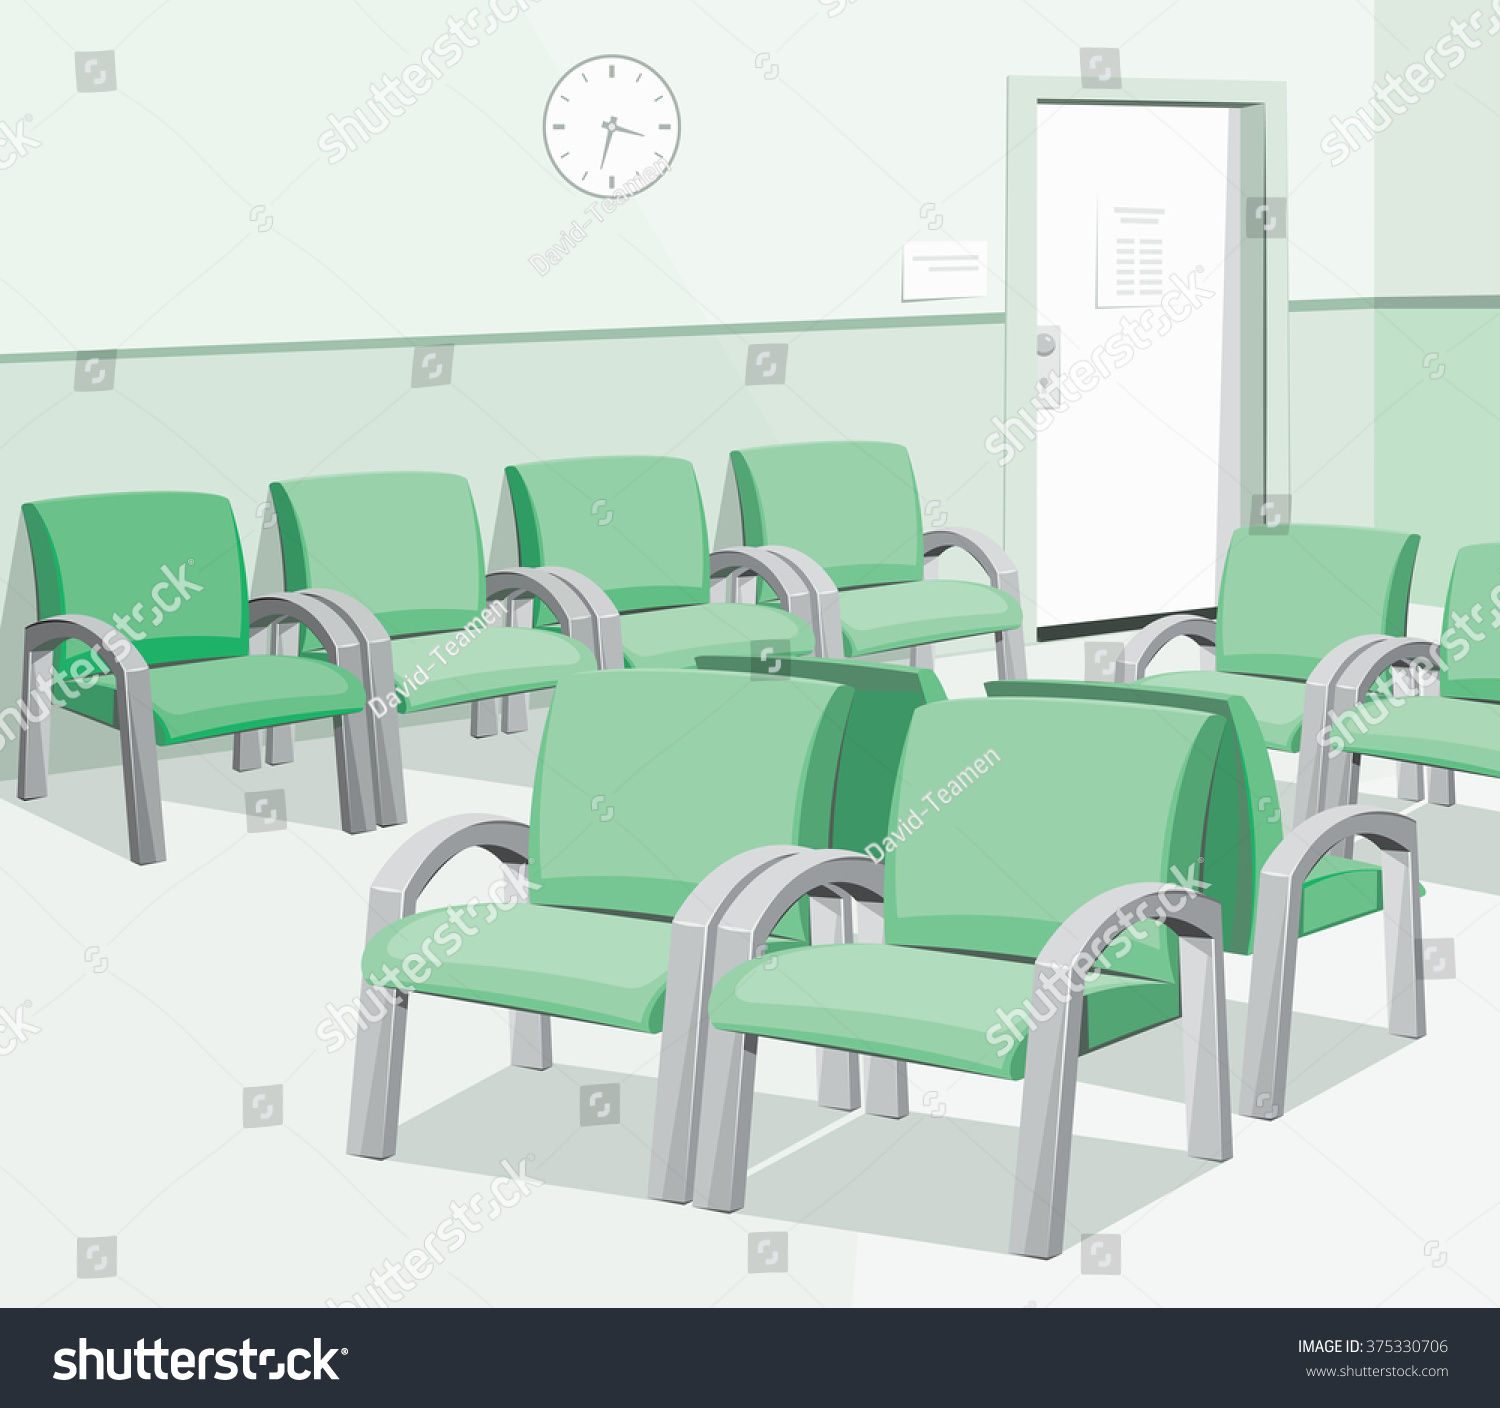 clipart waiting room - photo #39